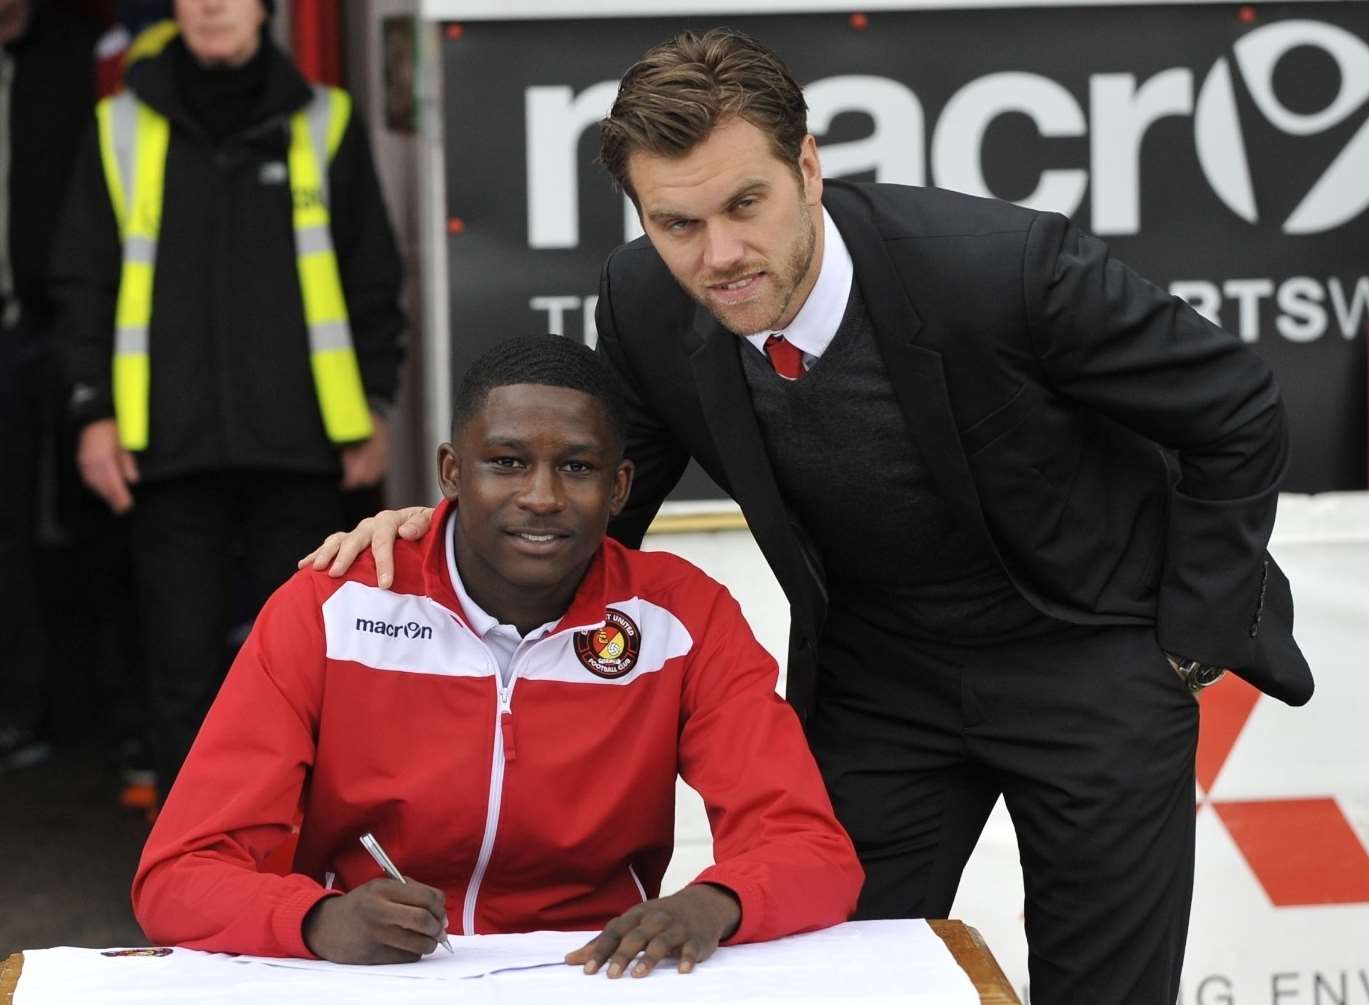 Academy prospect Shilow Tracey signs his first contract at Ebbsfleet United